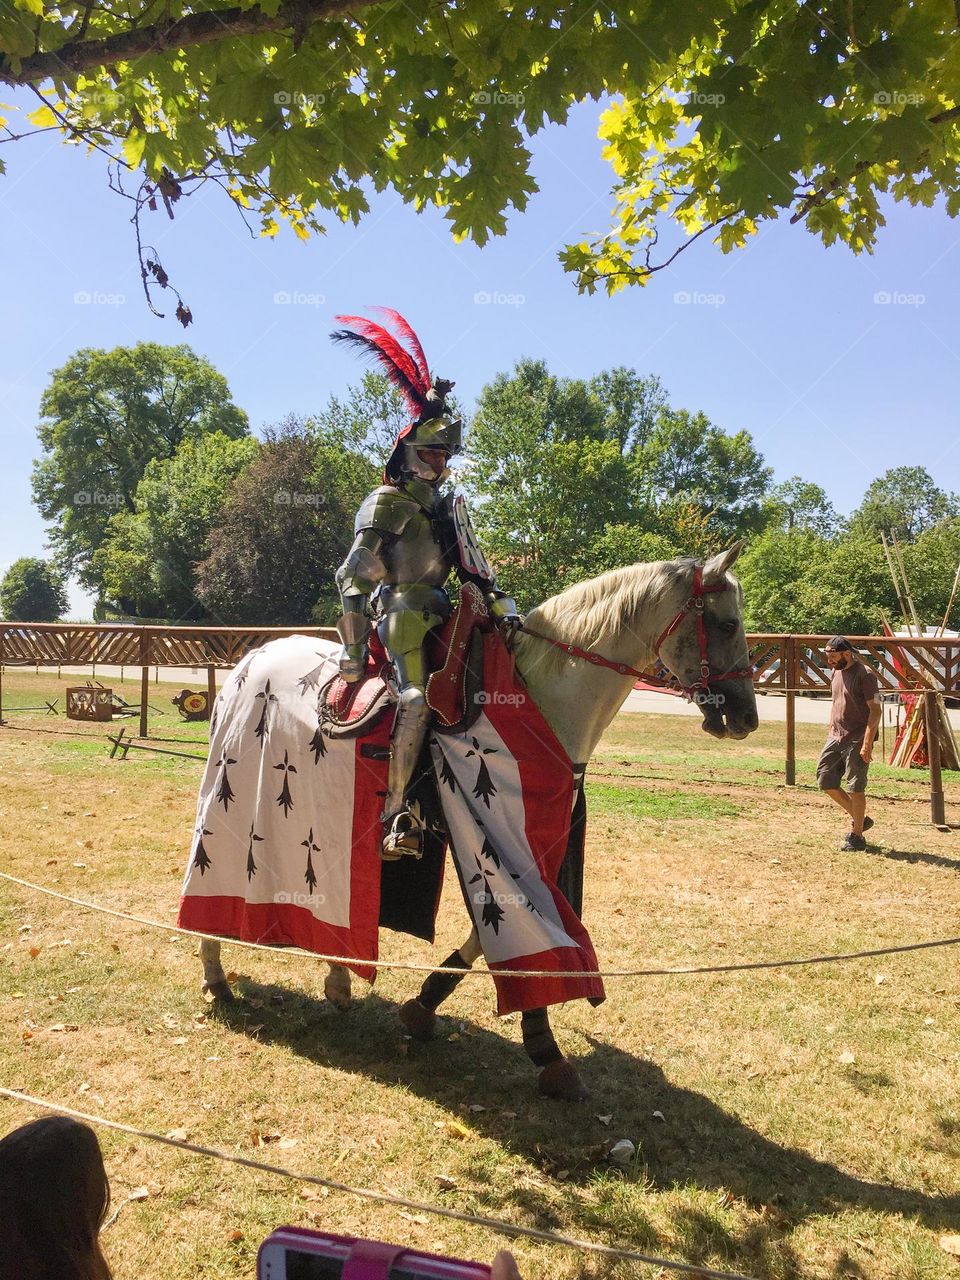 Medieval knight riding on a decorated horse preparing for jousting